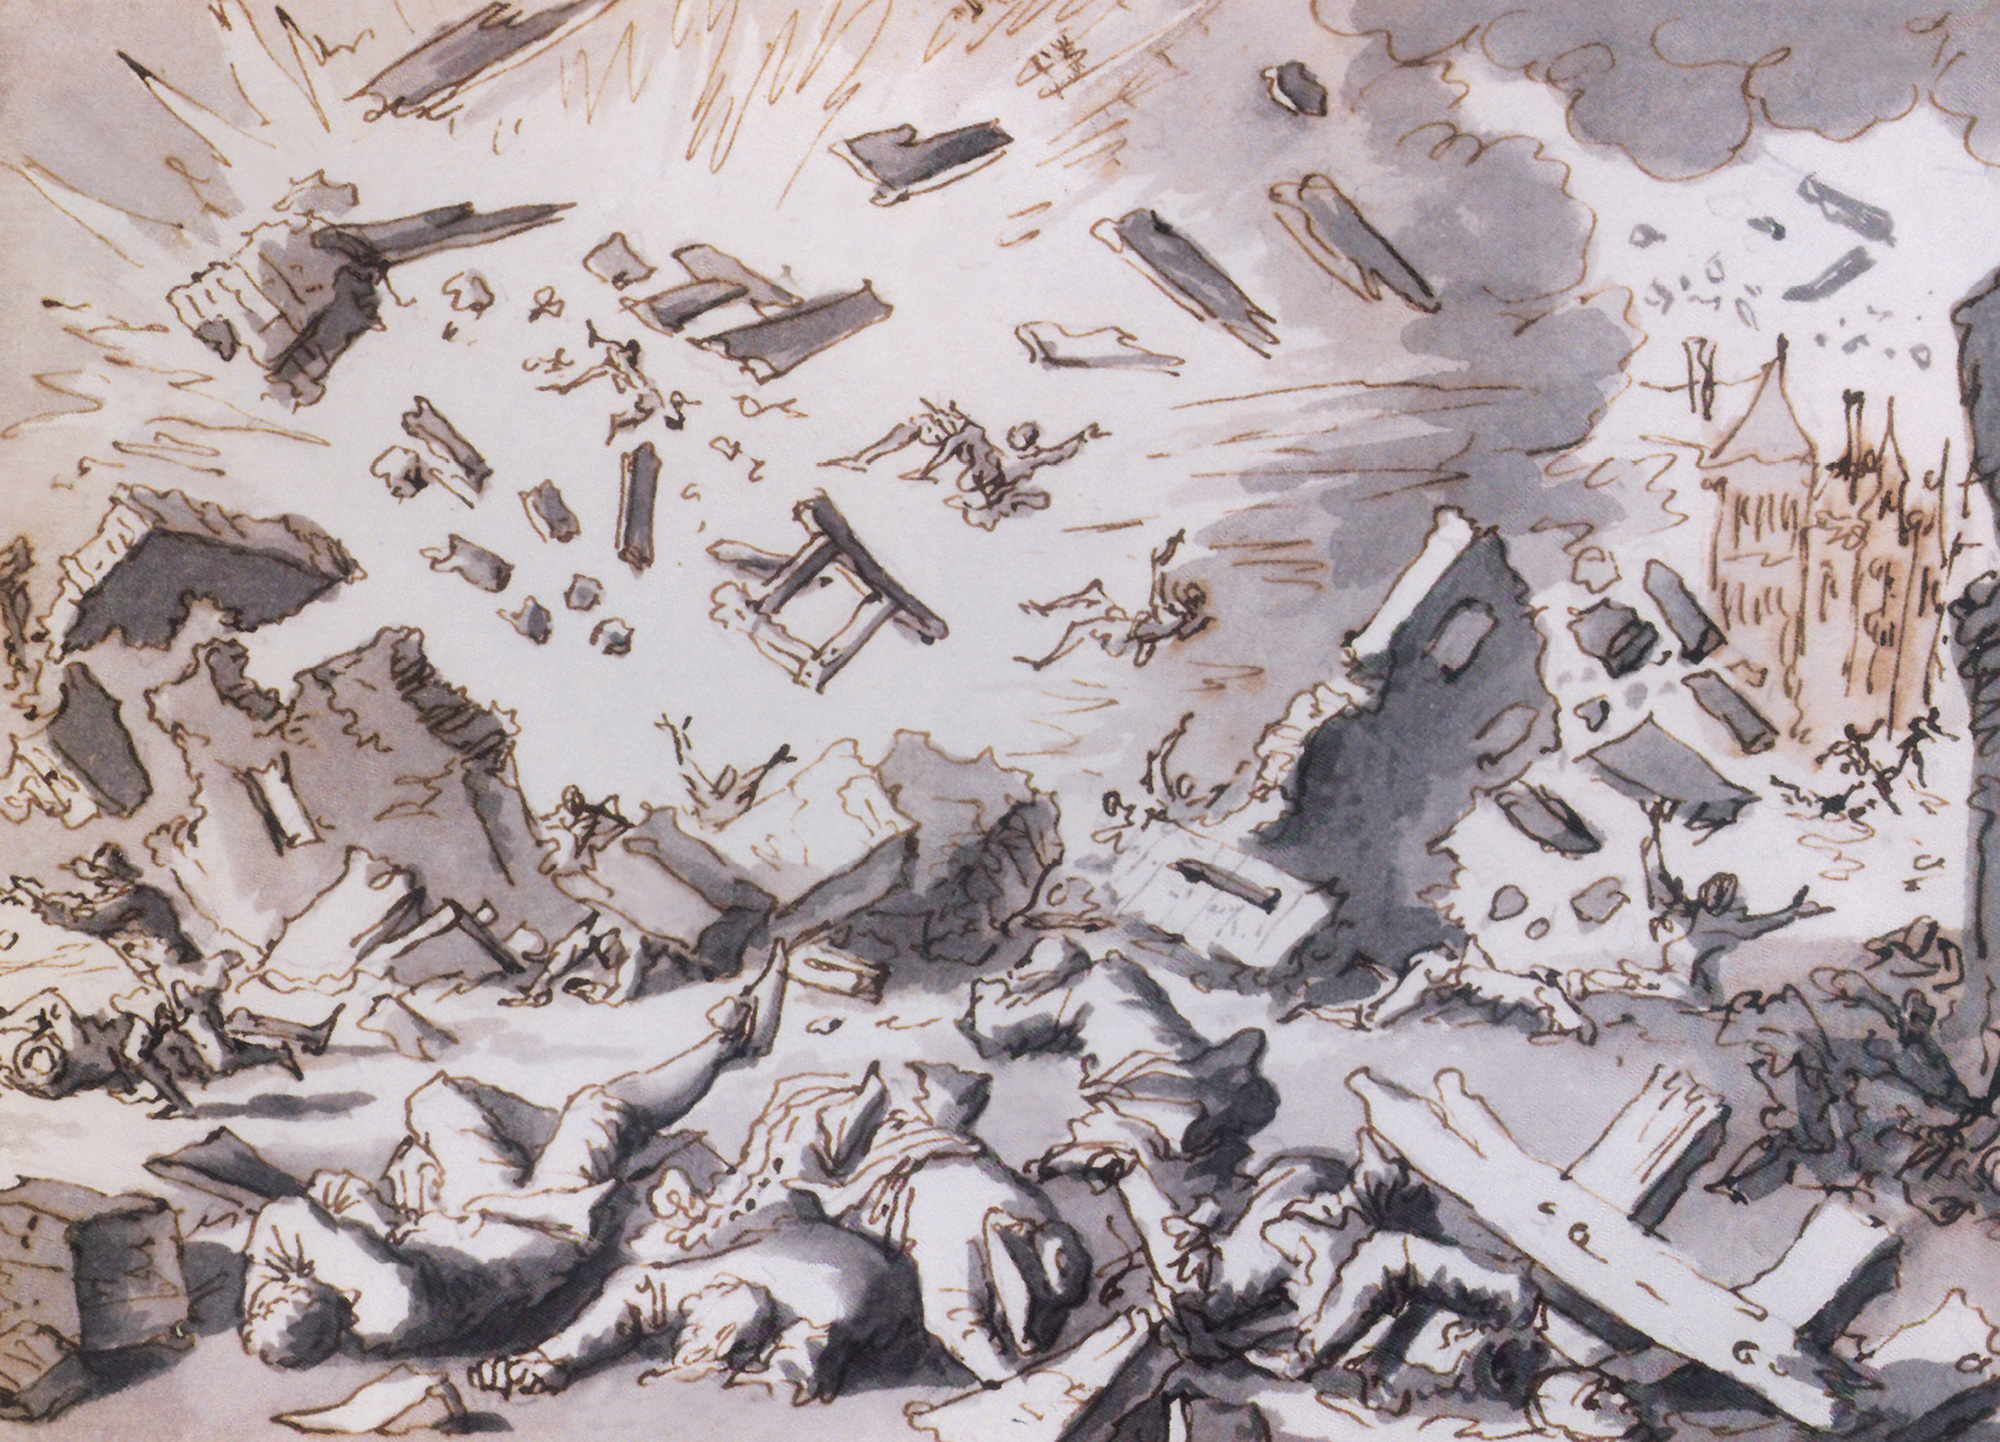 A detail from Jan Luyken’s sixteen ninety-eight artwork “The 1654 Explosion of the Gunpowder Store in Delft, sixteen ninety-eight.” It shows a group of men knocked down in the midst of an explosion.